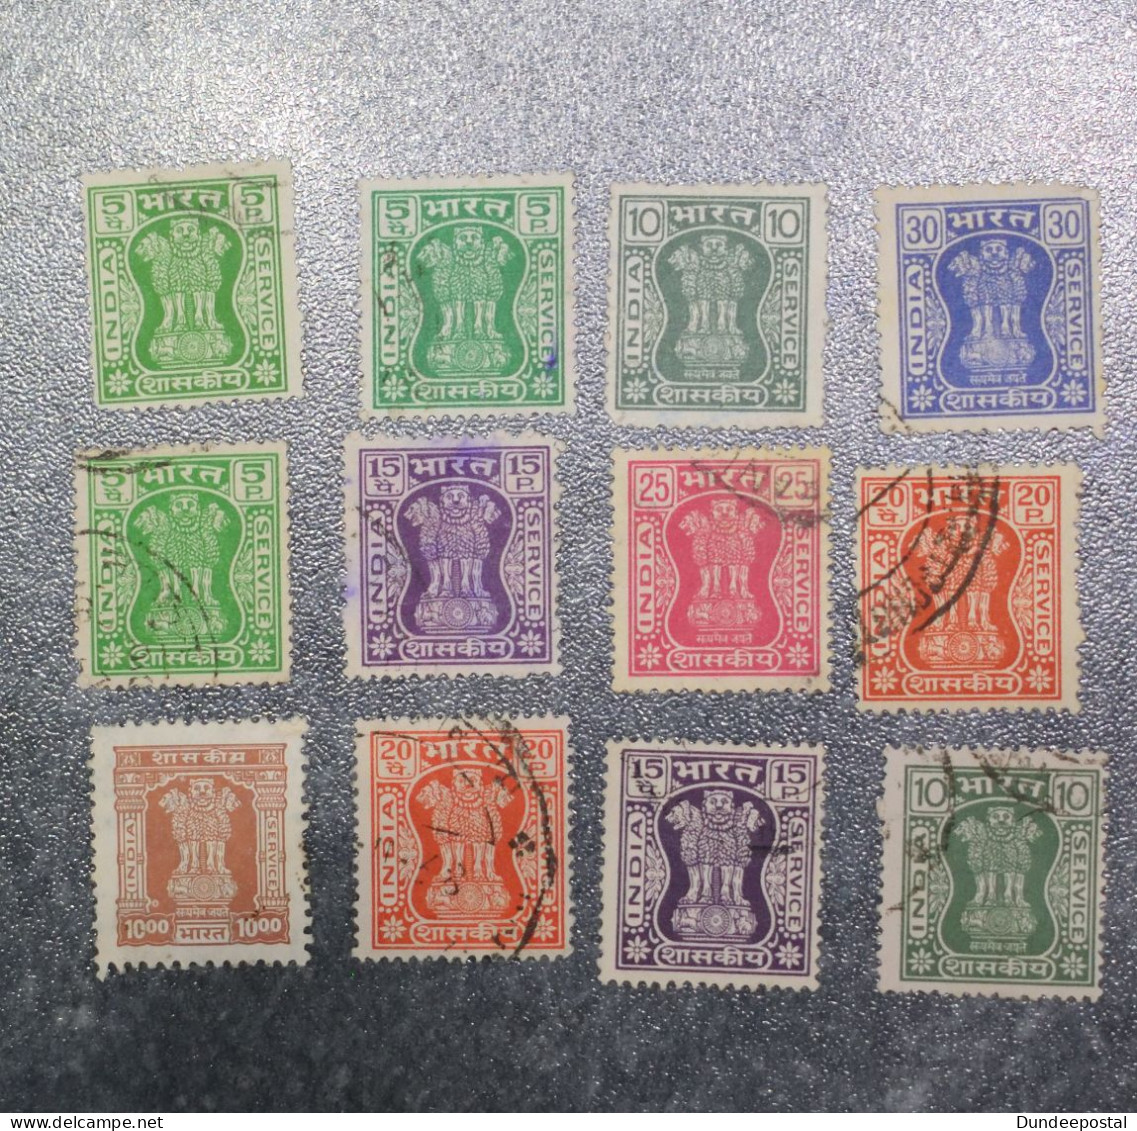 INDIA  STAMPS  Coms 1967 ->    (N25)   ~~L@@K~~ - Gebraucht